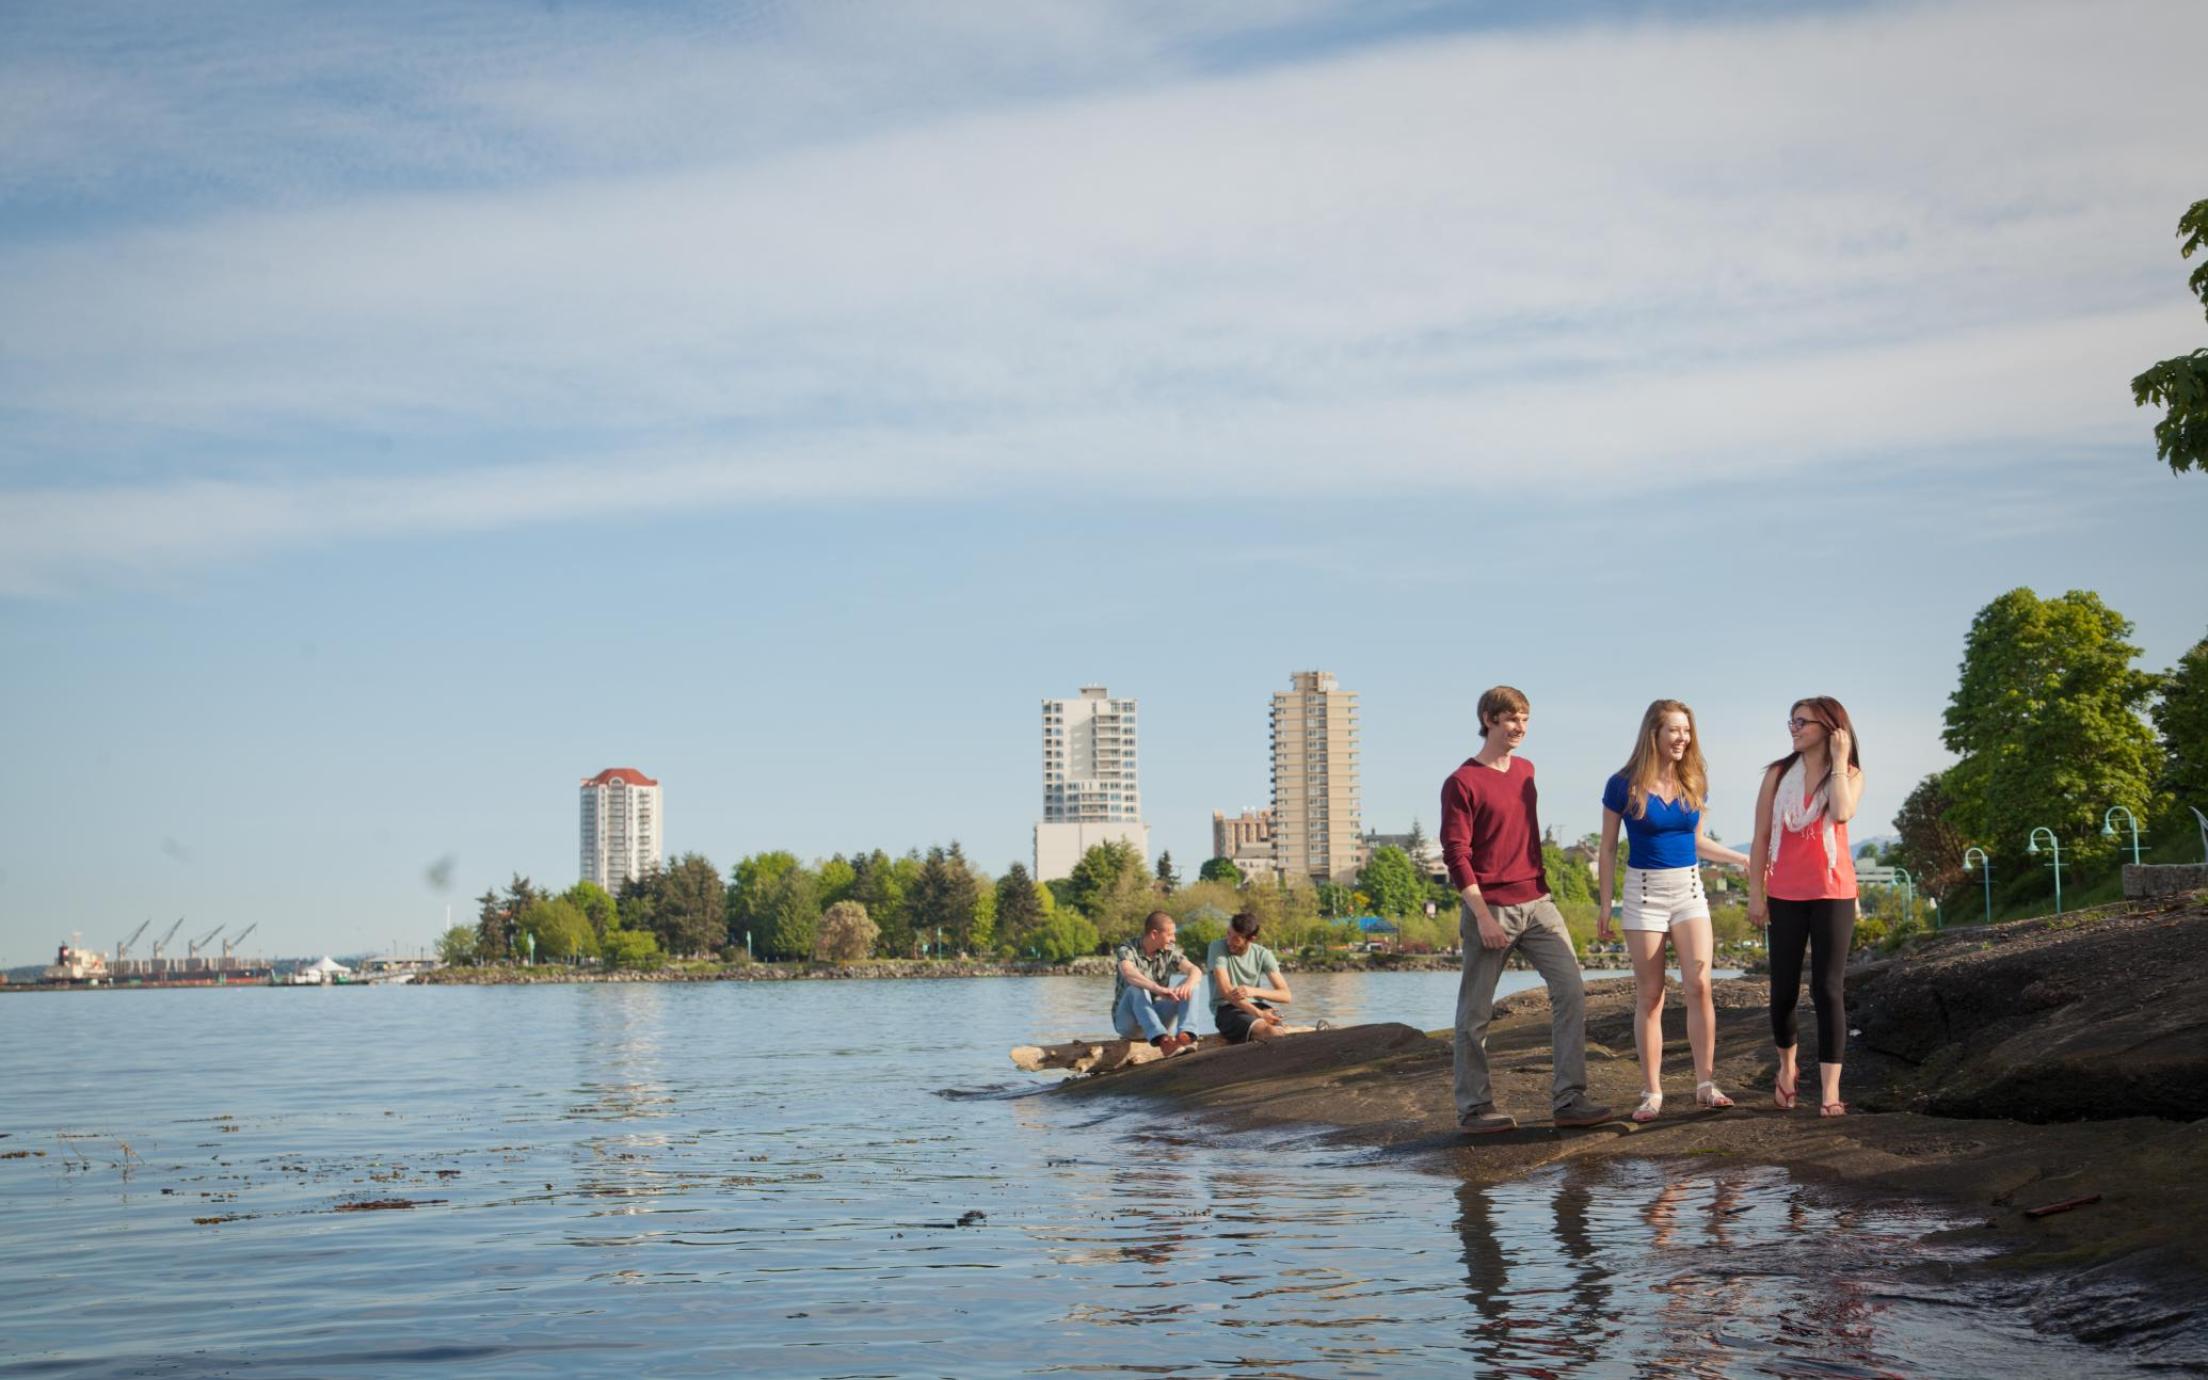 Two groups of students enjoy the waterfront in downtown Nanaimo